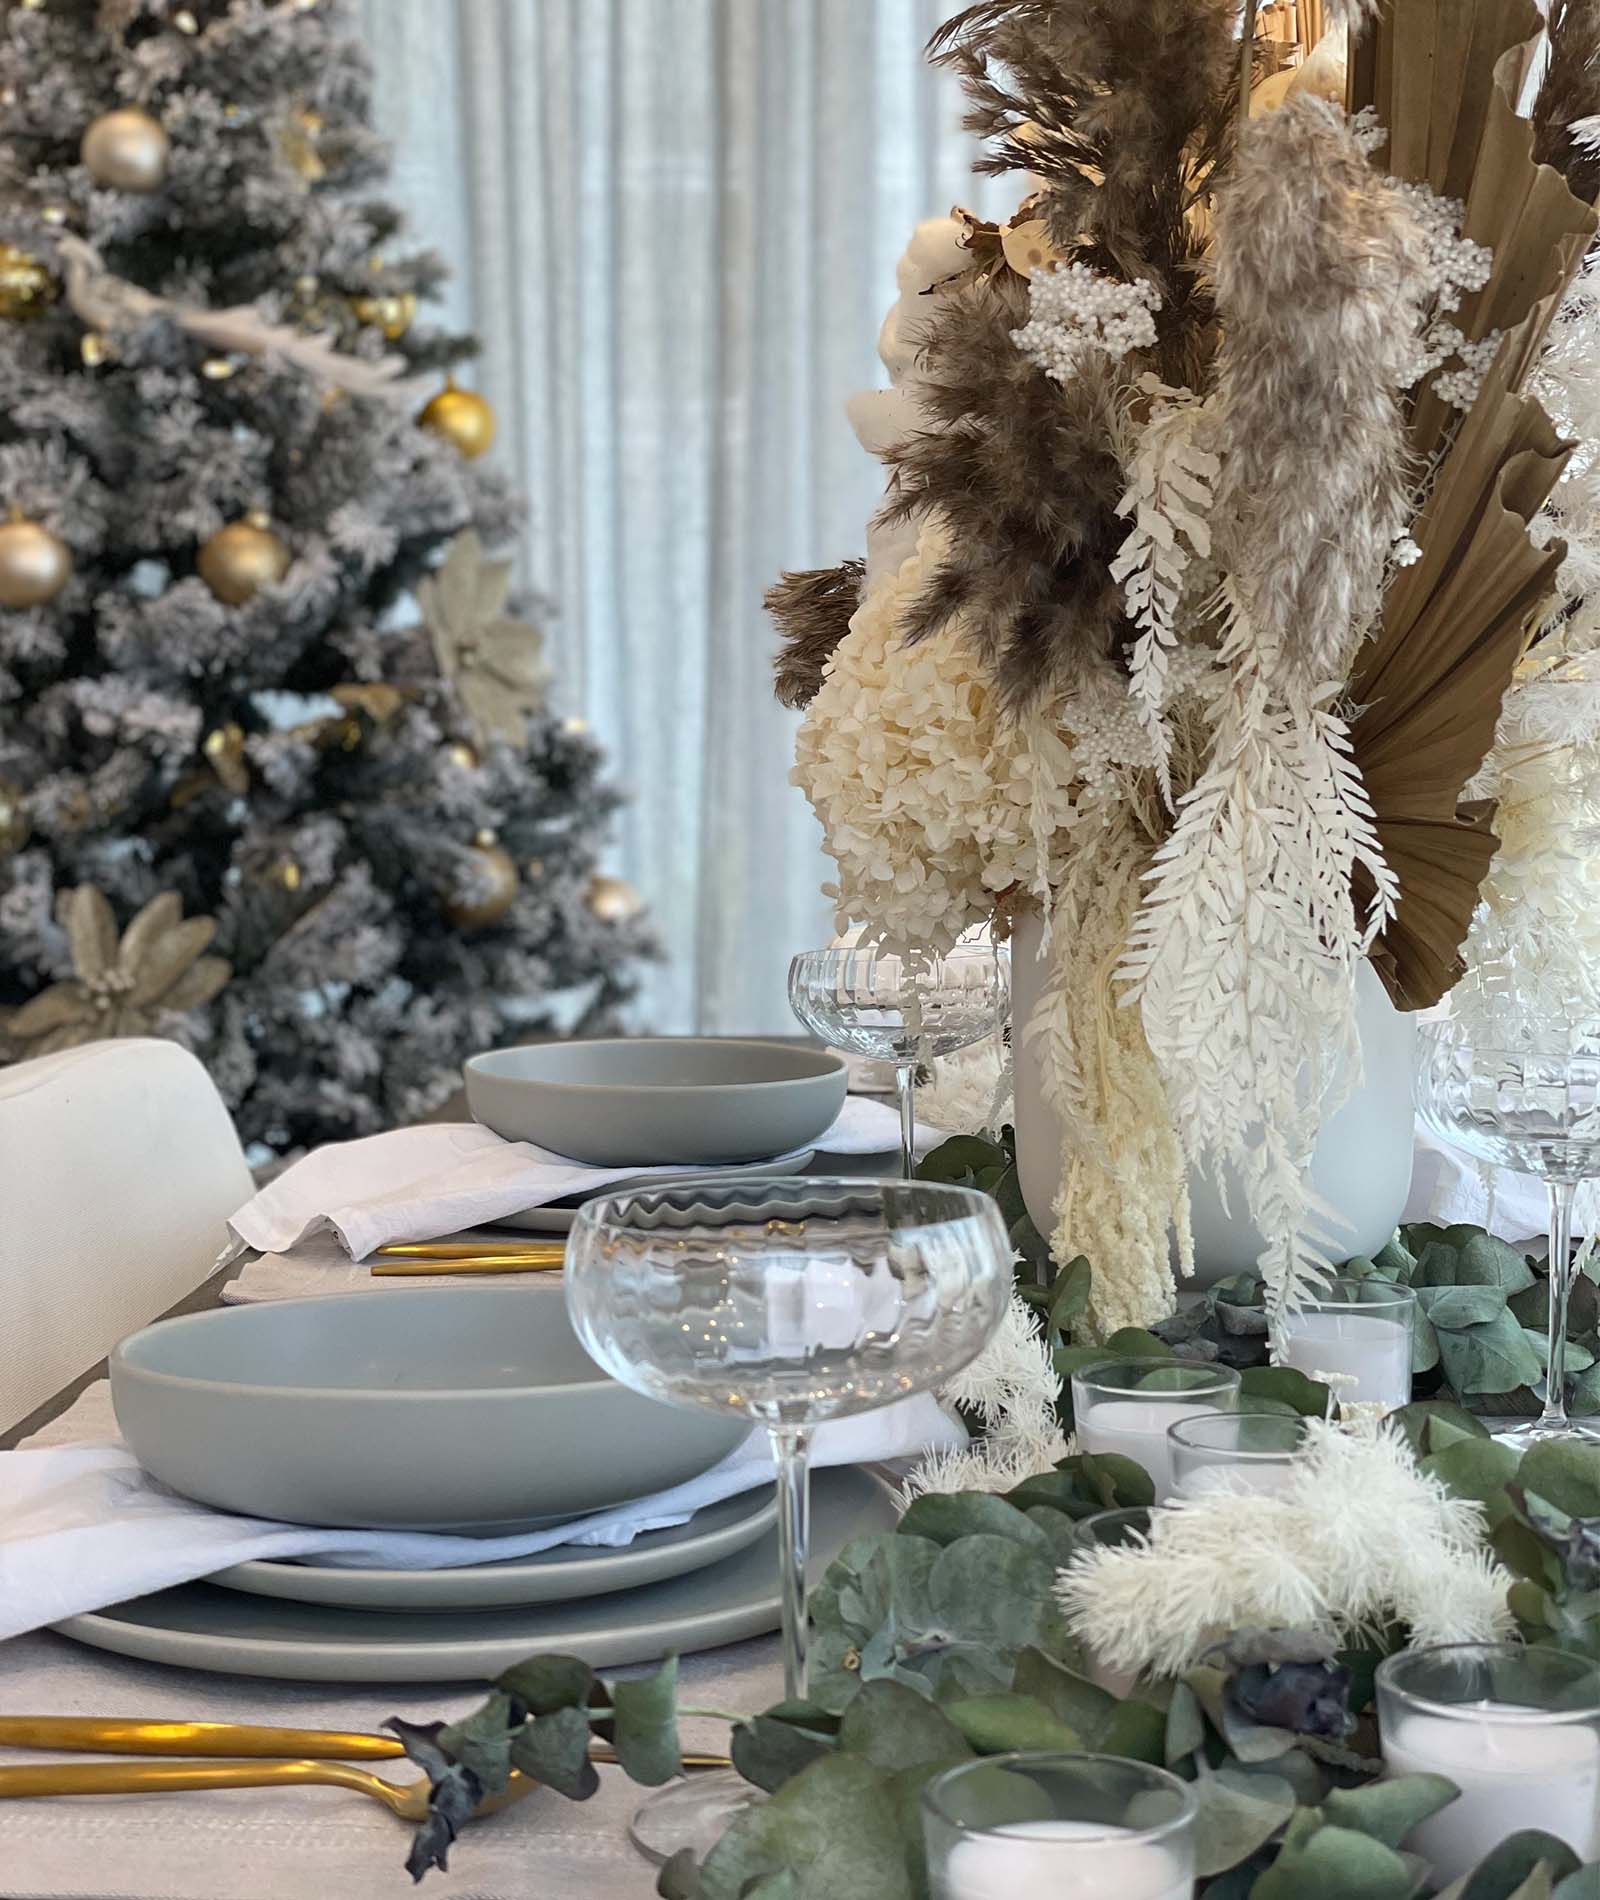 How to Dress Your Festive Table in Style